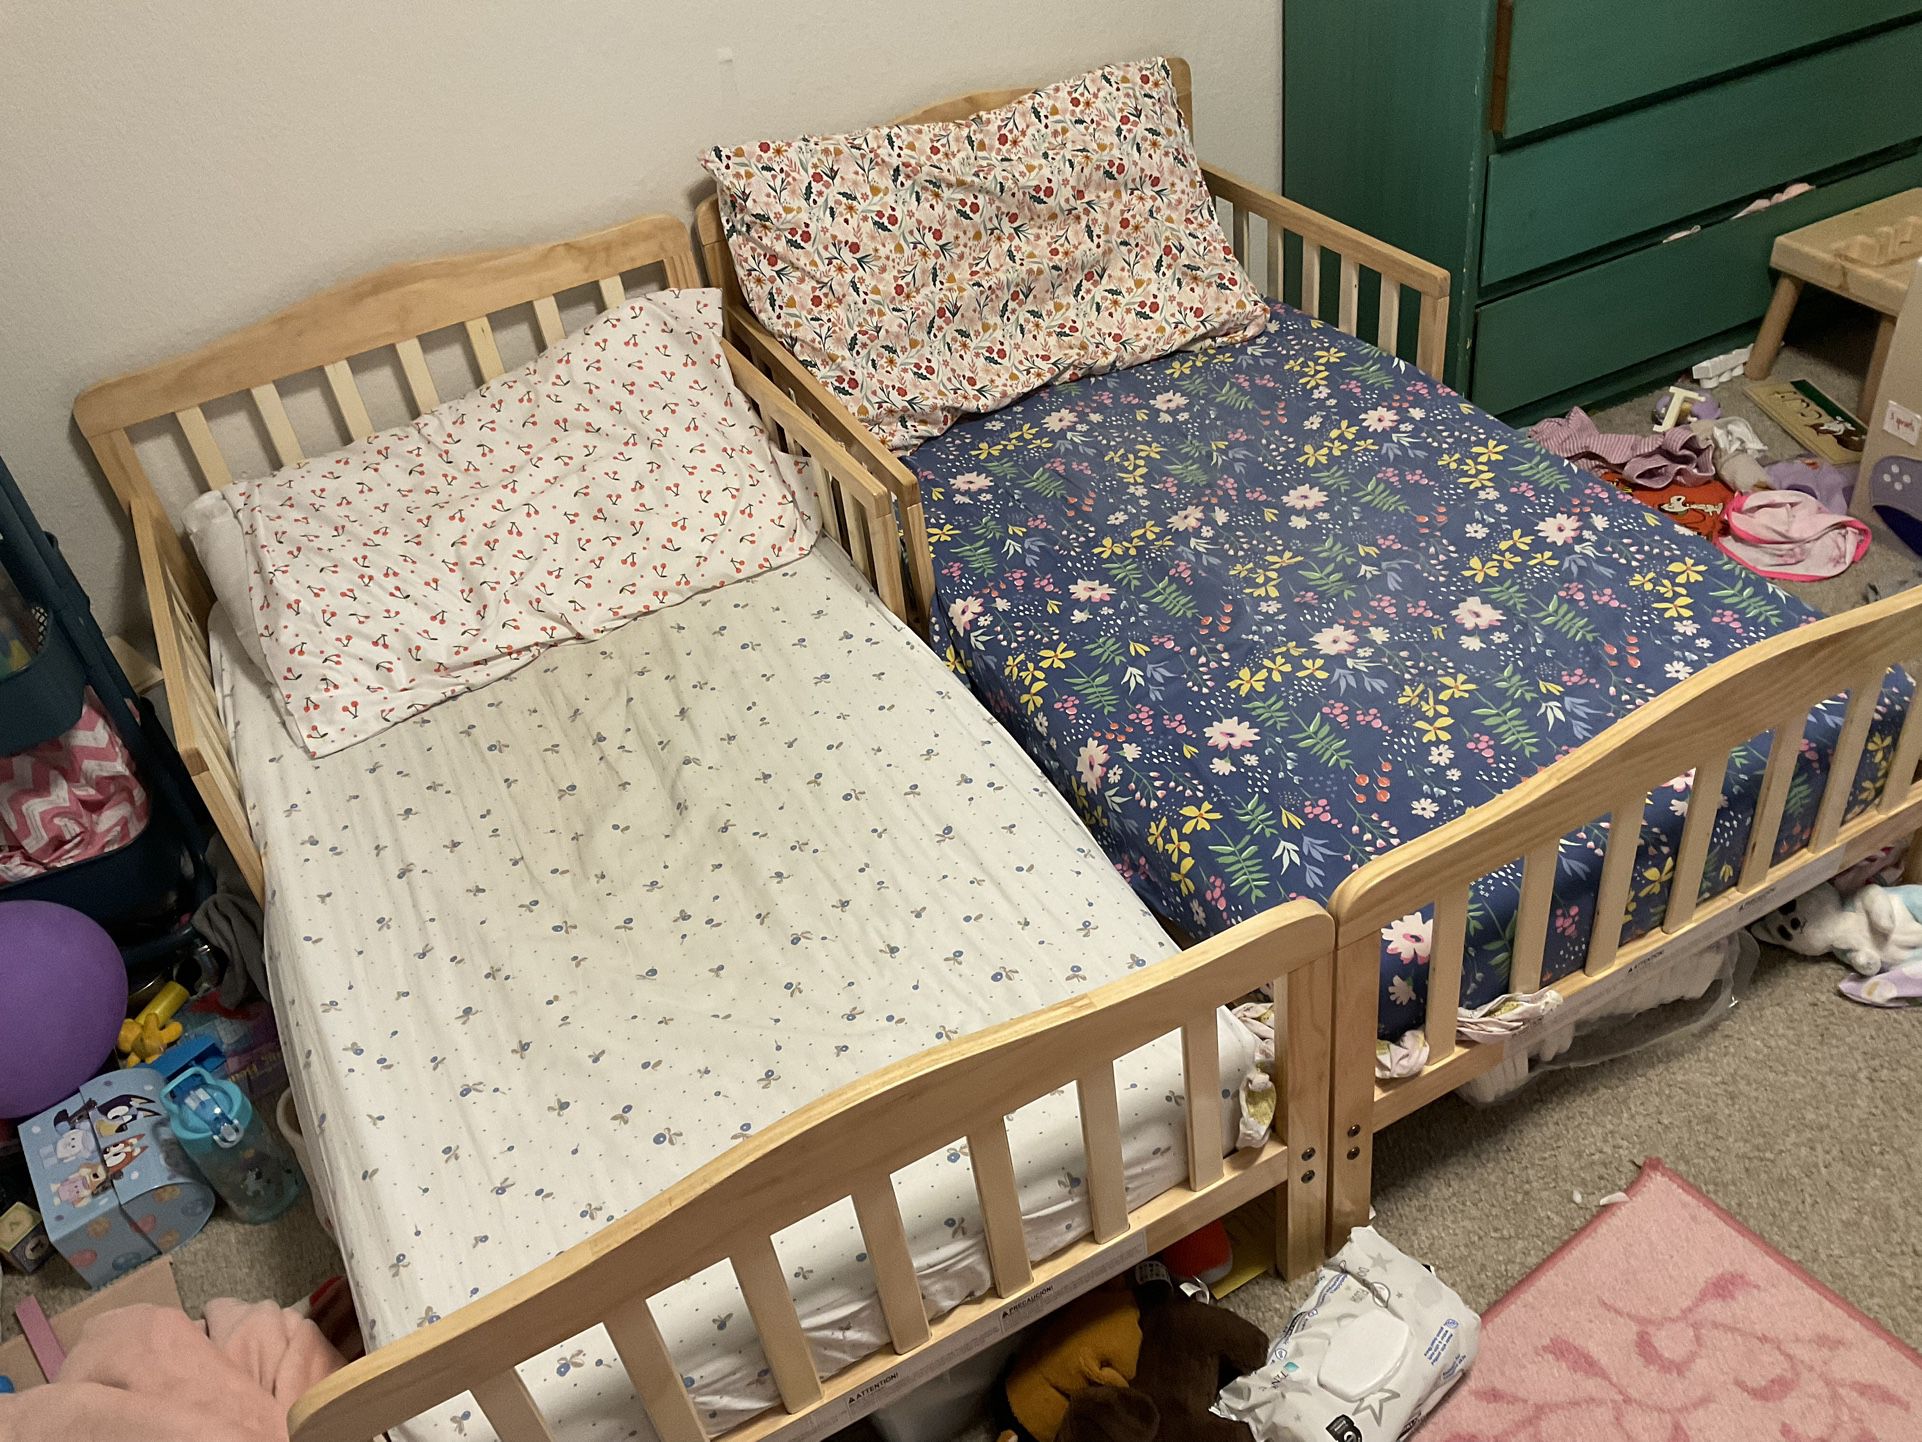 2 Toddler Beds (Frames and Mattresses) *Please see availability description